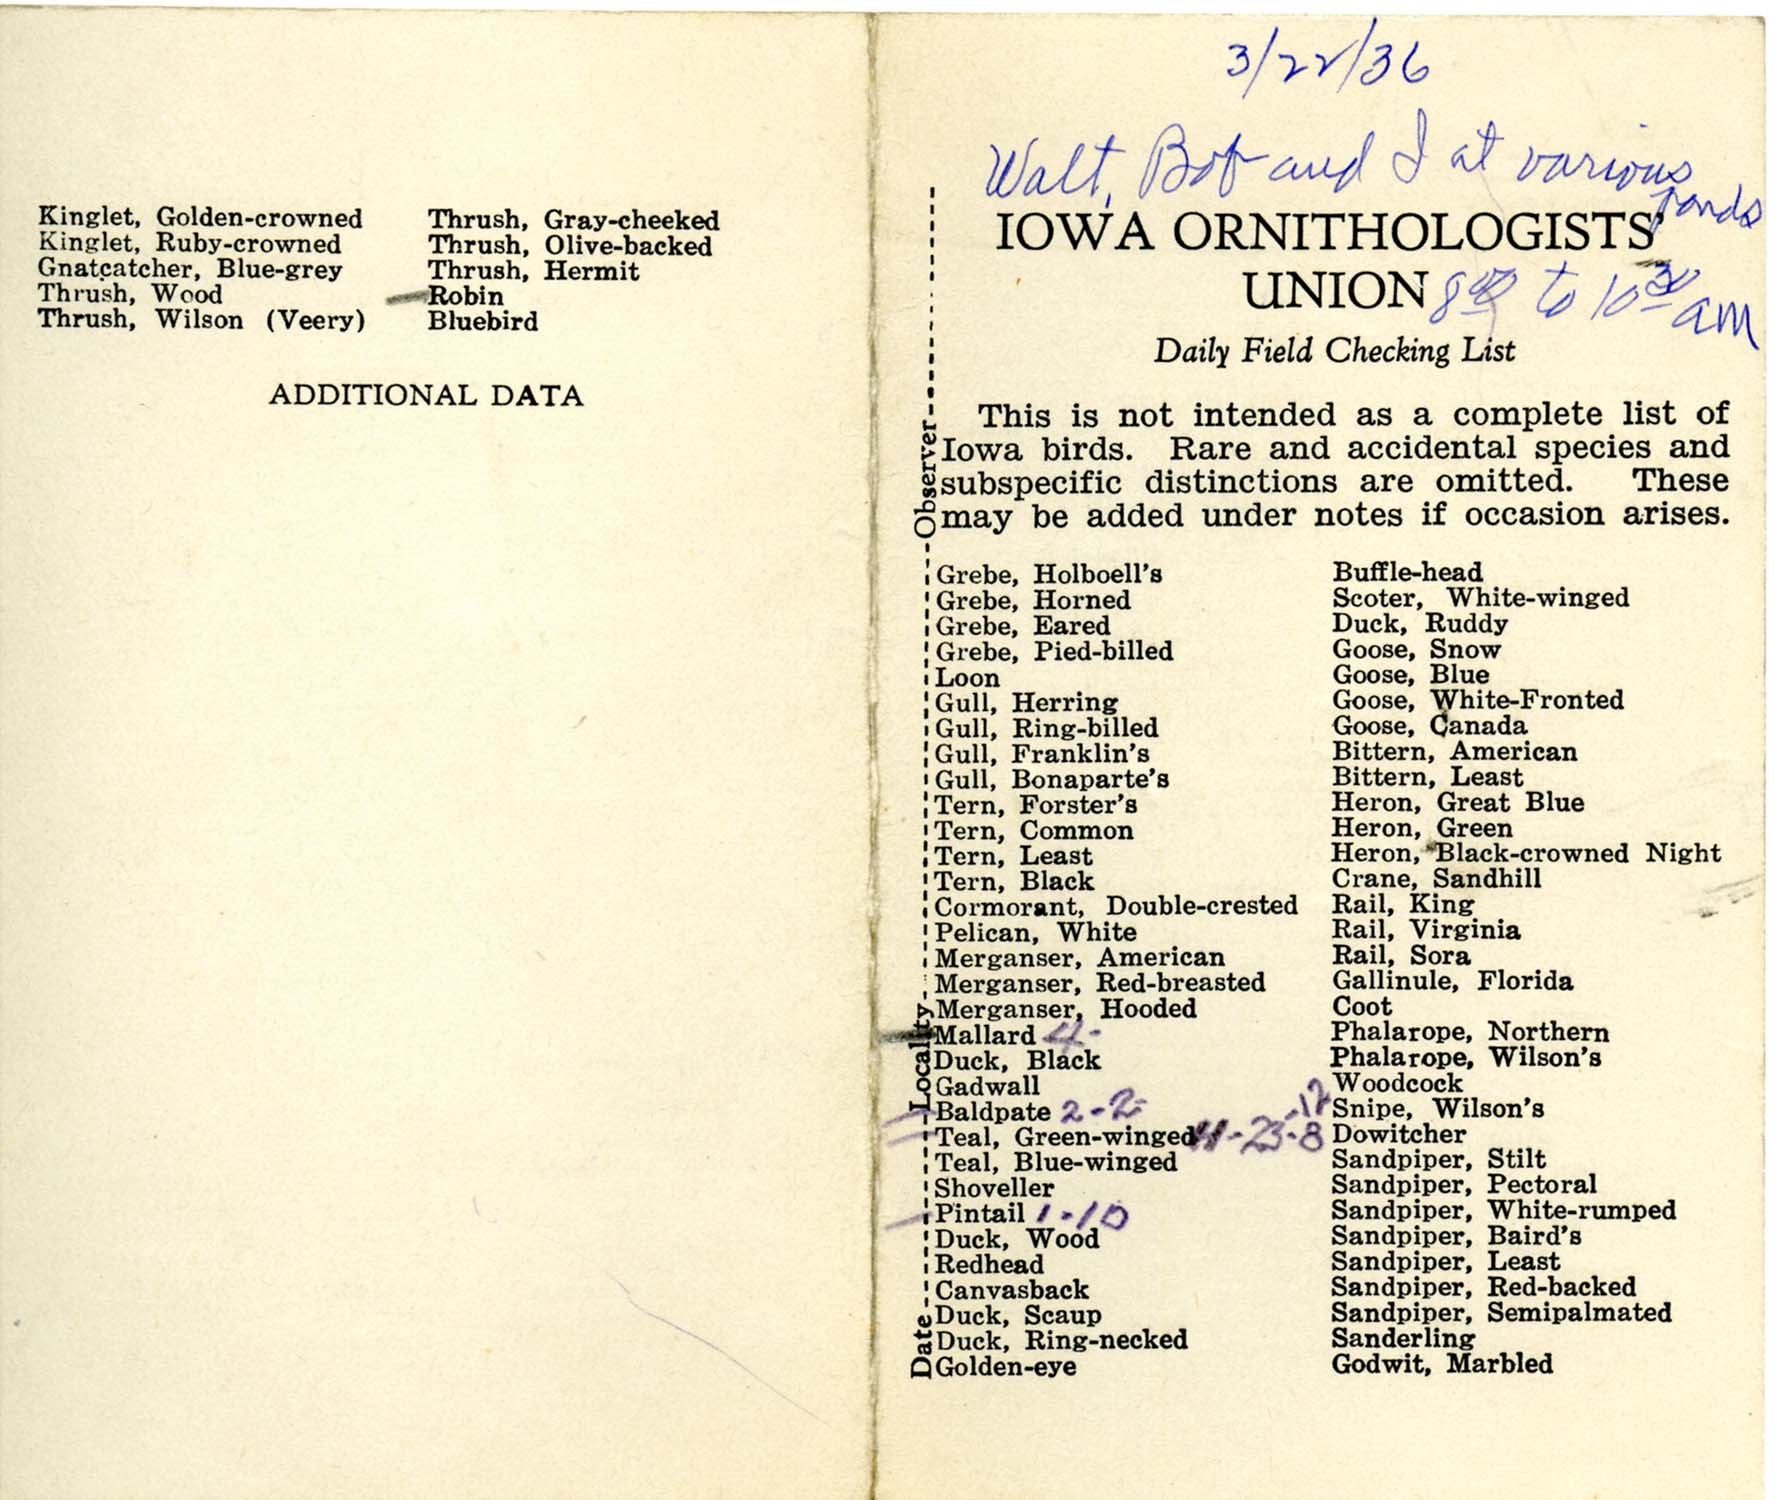 Daily field checking list by Walter Rosene, March 22, 1936